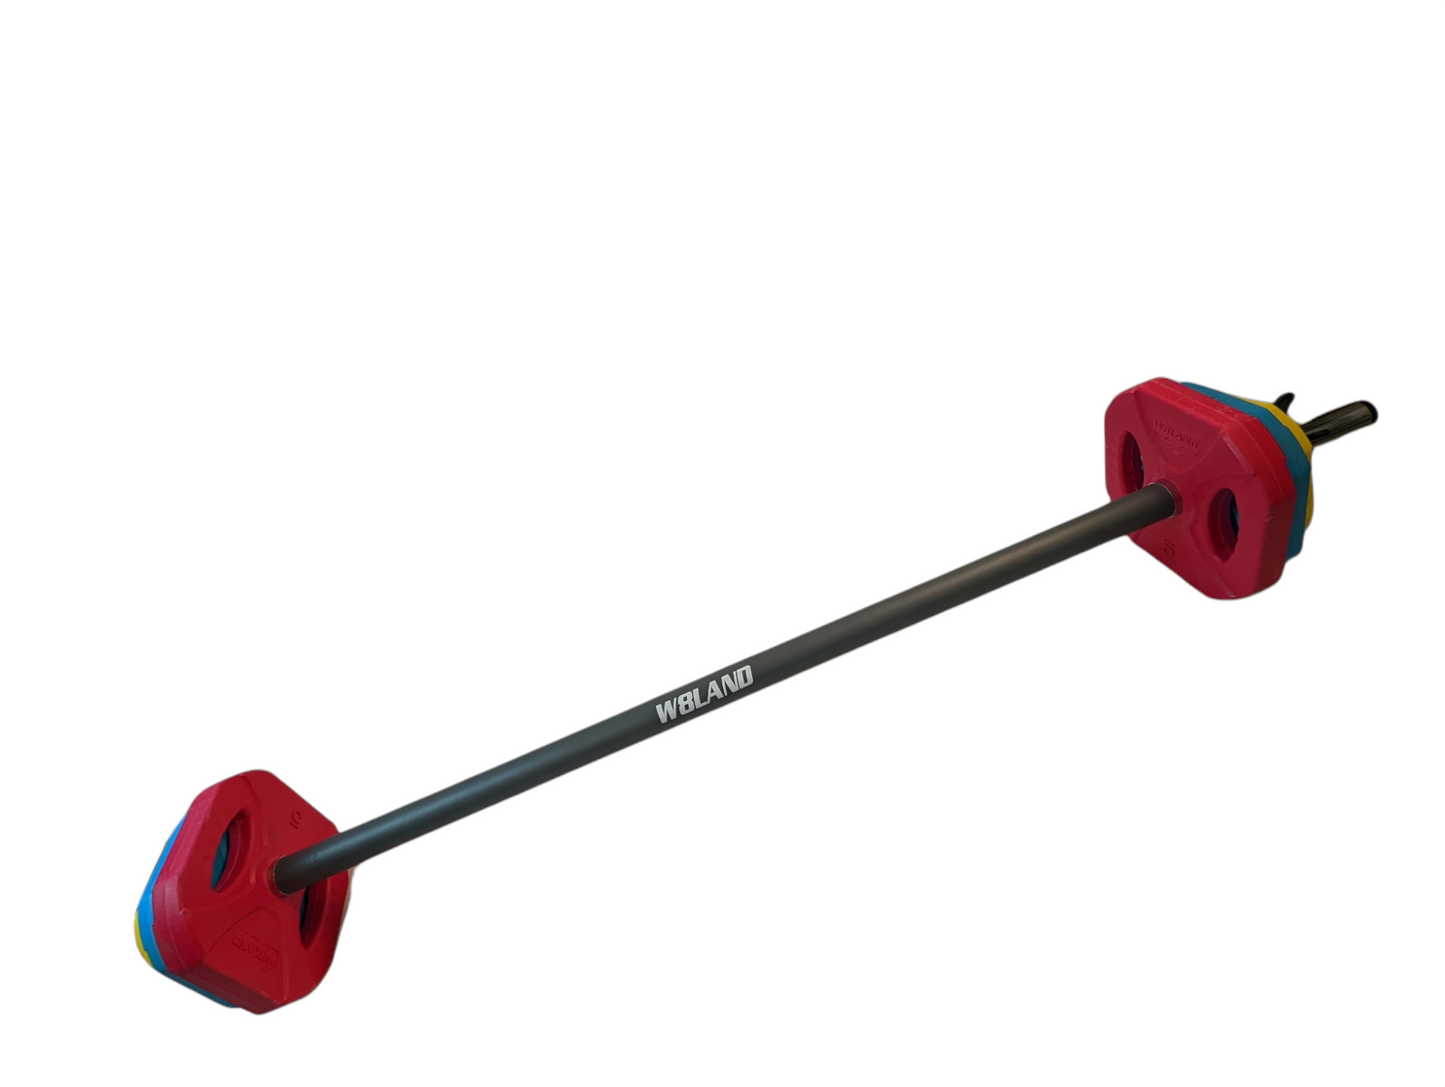 Pump Class Set - 20 W8LAND 20kg Studio Barbell Weight Sets with Rack